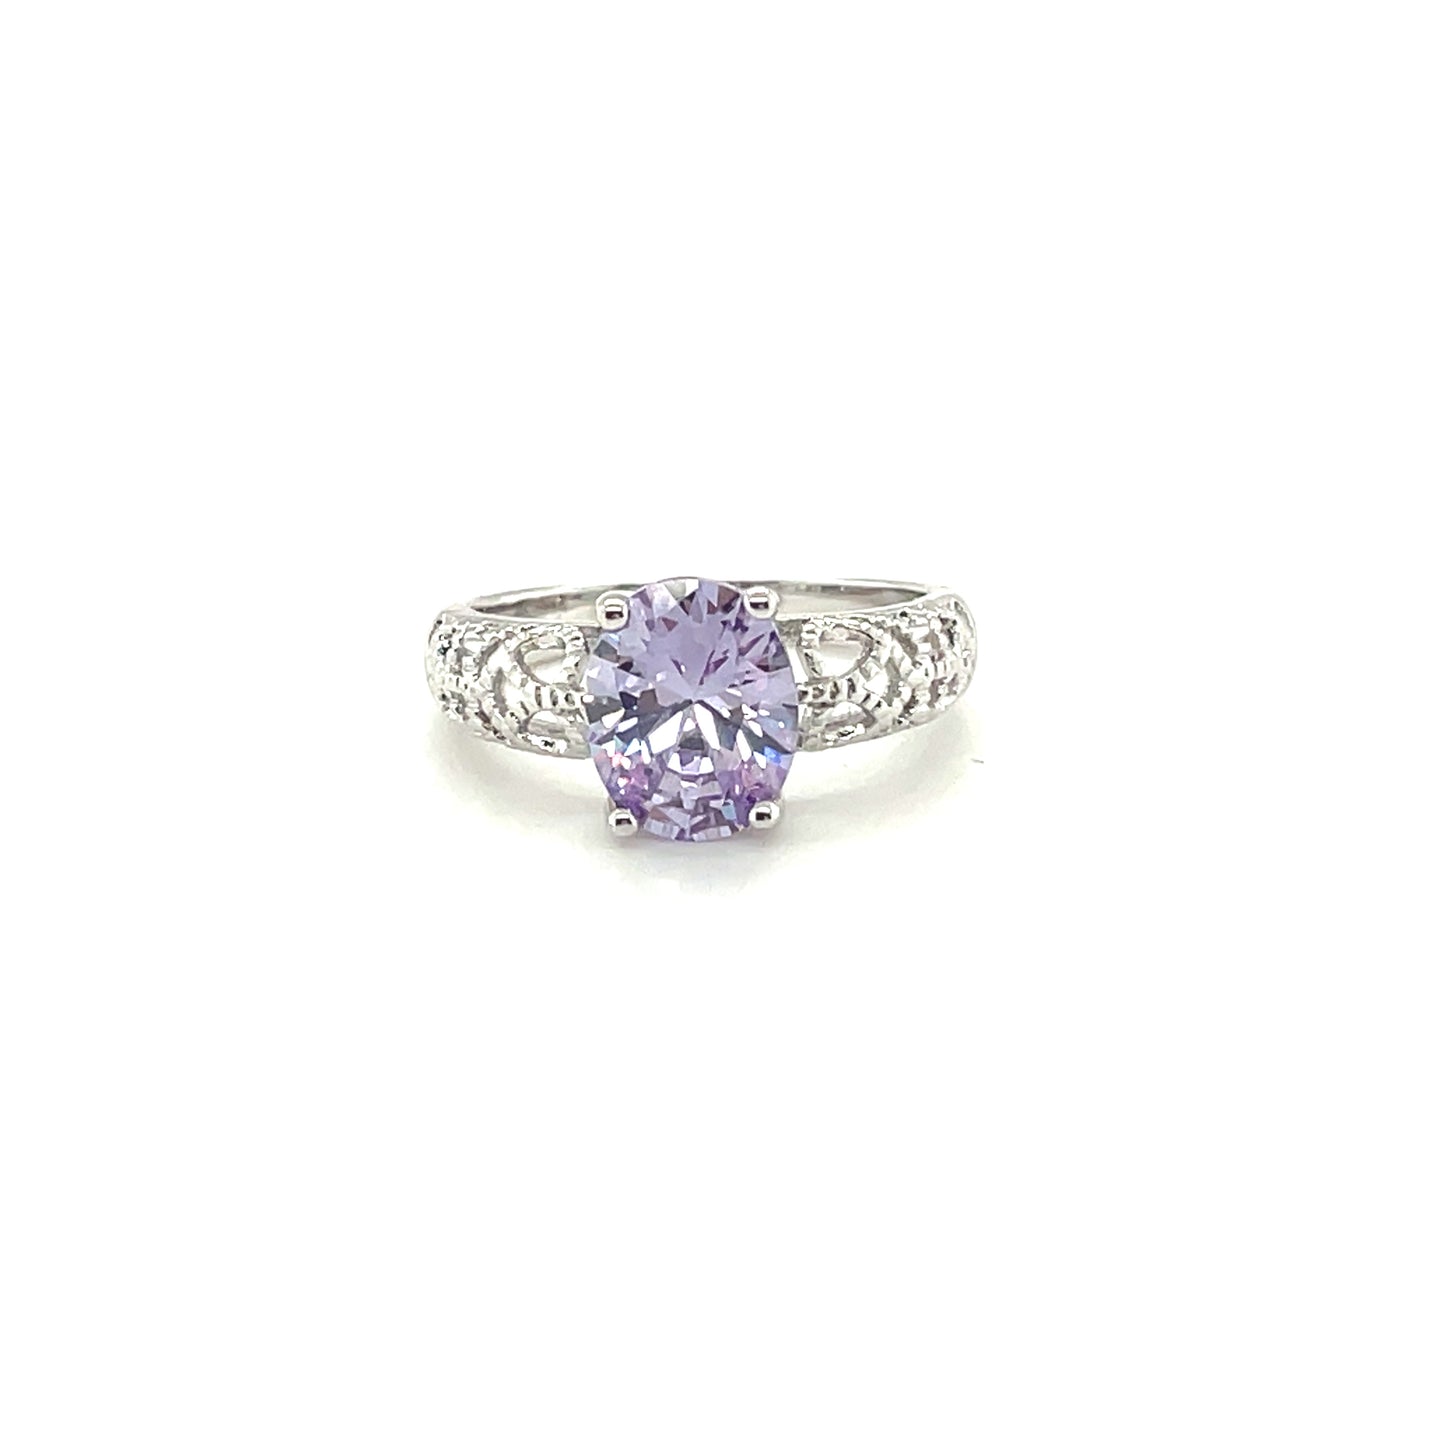 BMR40103CB - Oval Cut Solitaire Stone - Engagemet Ring